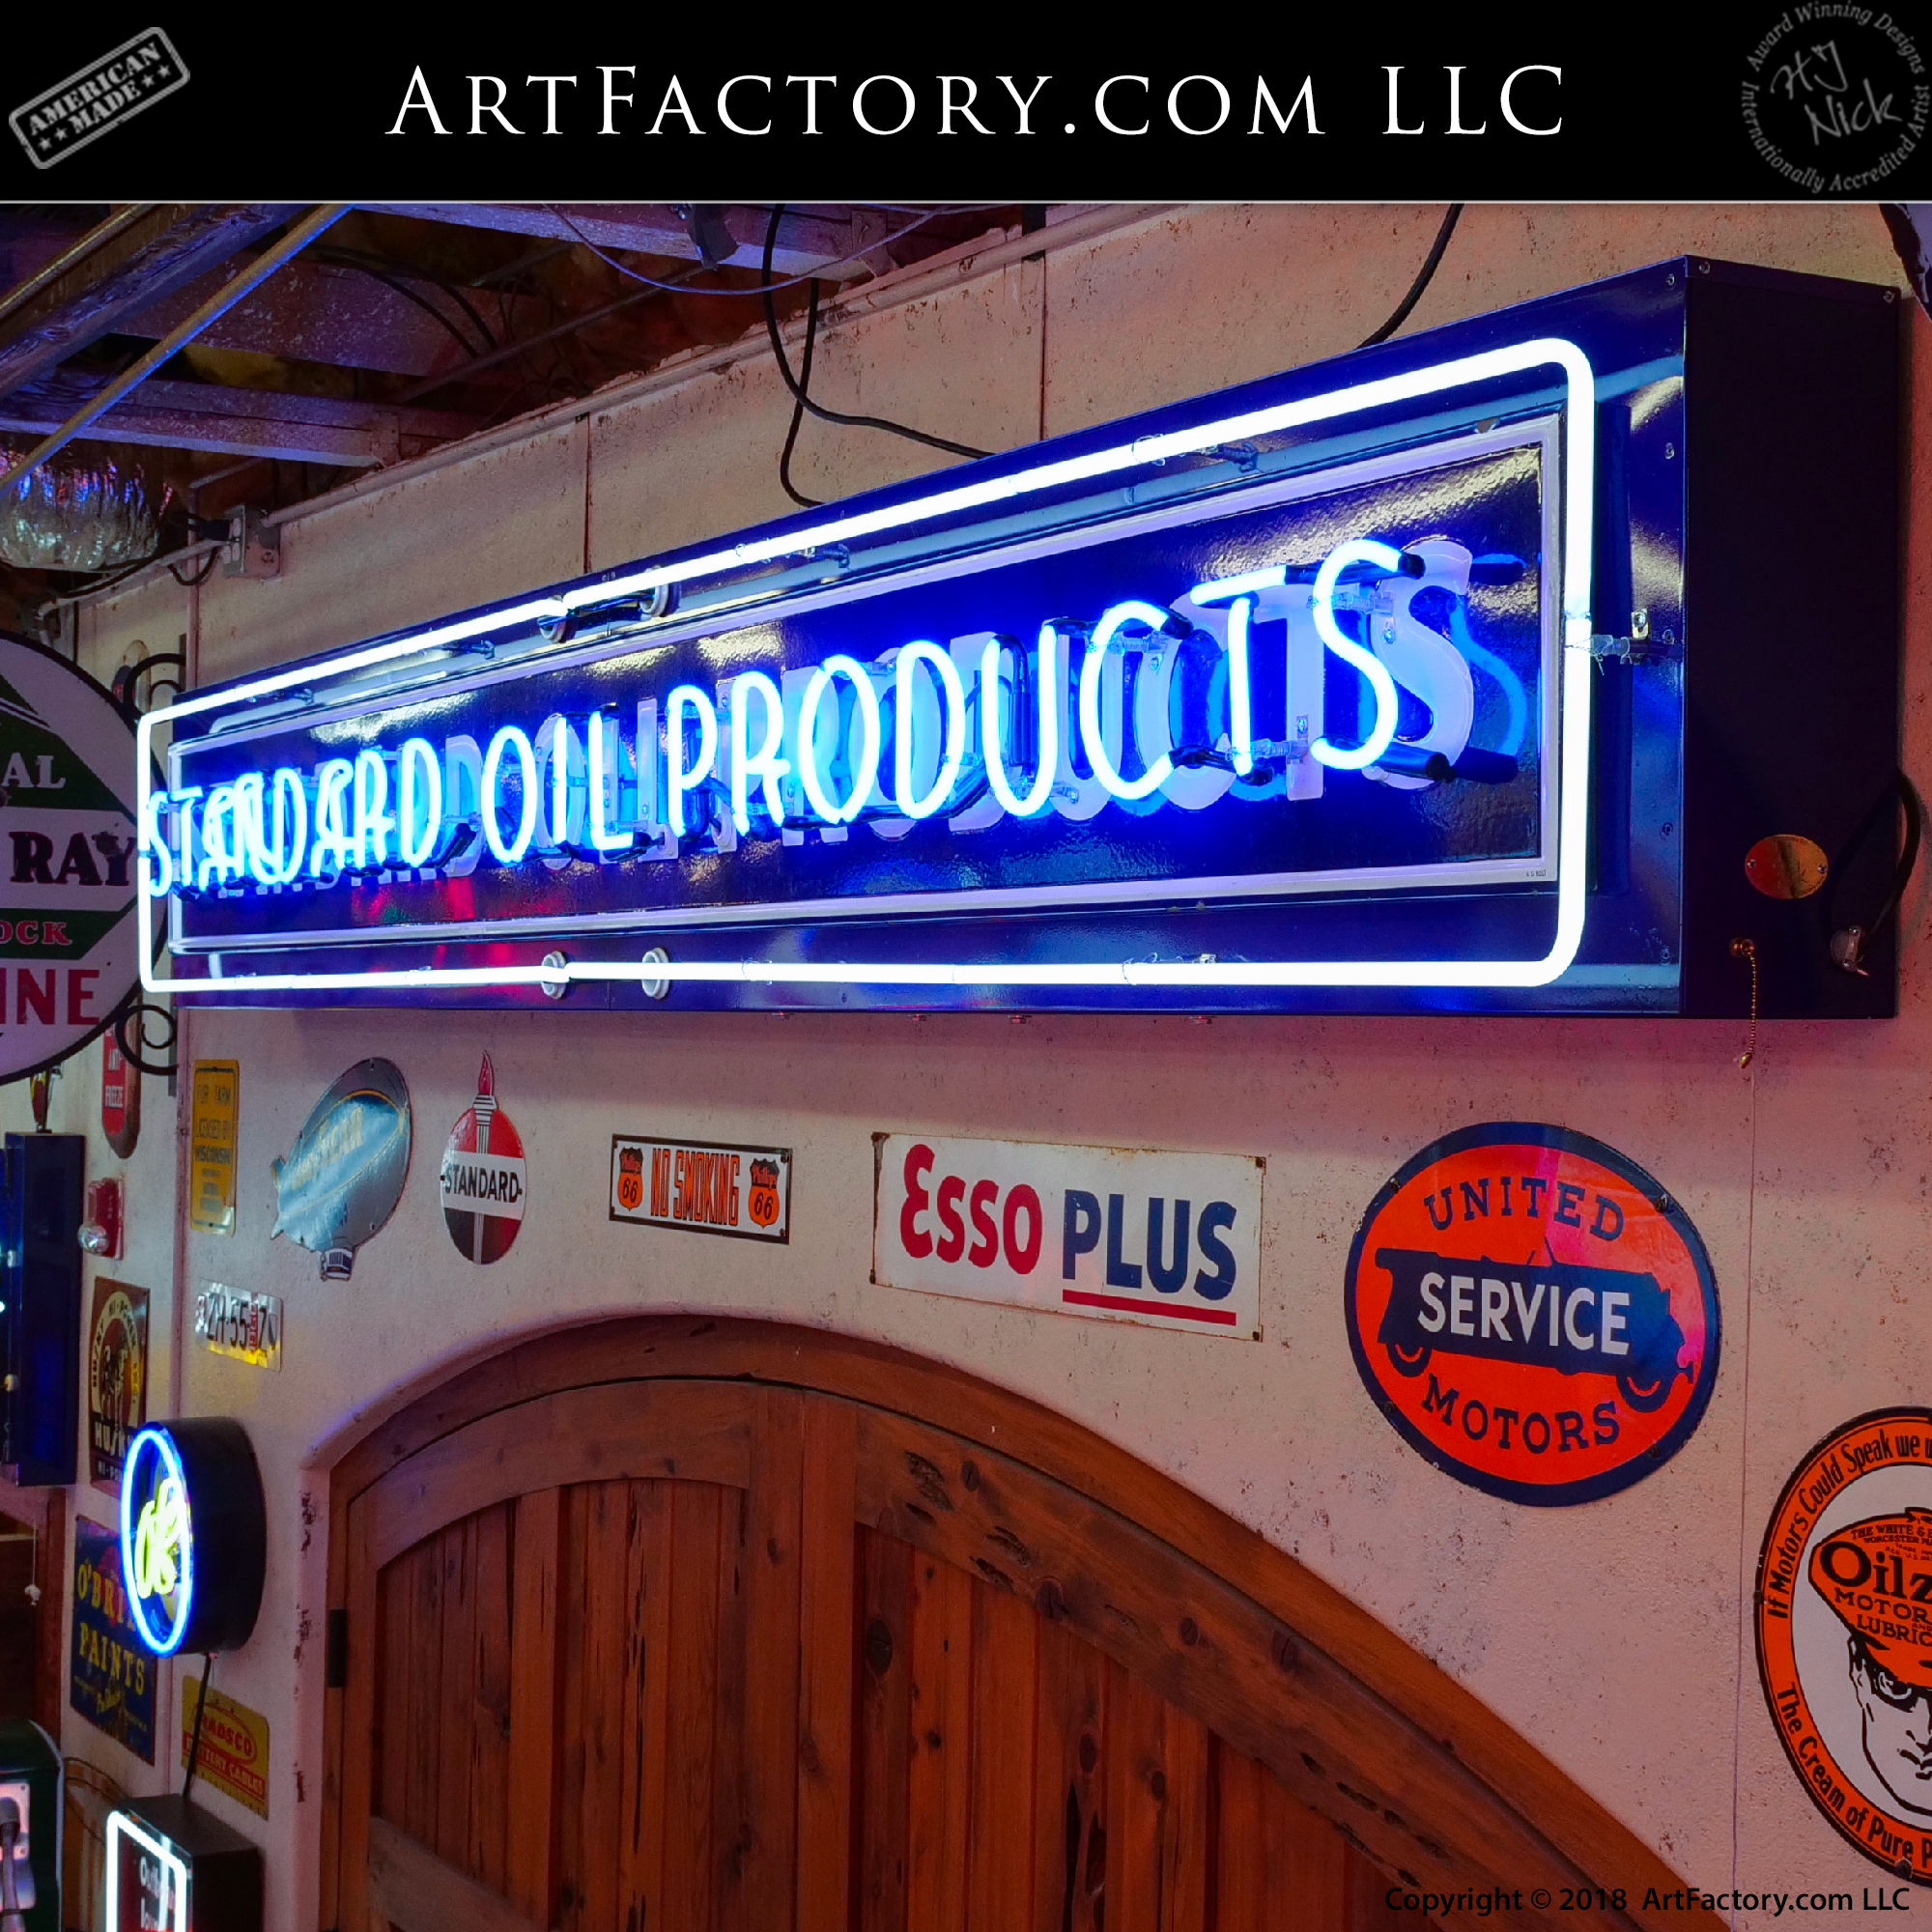 Standard Oil Products Vintage Neon